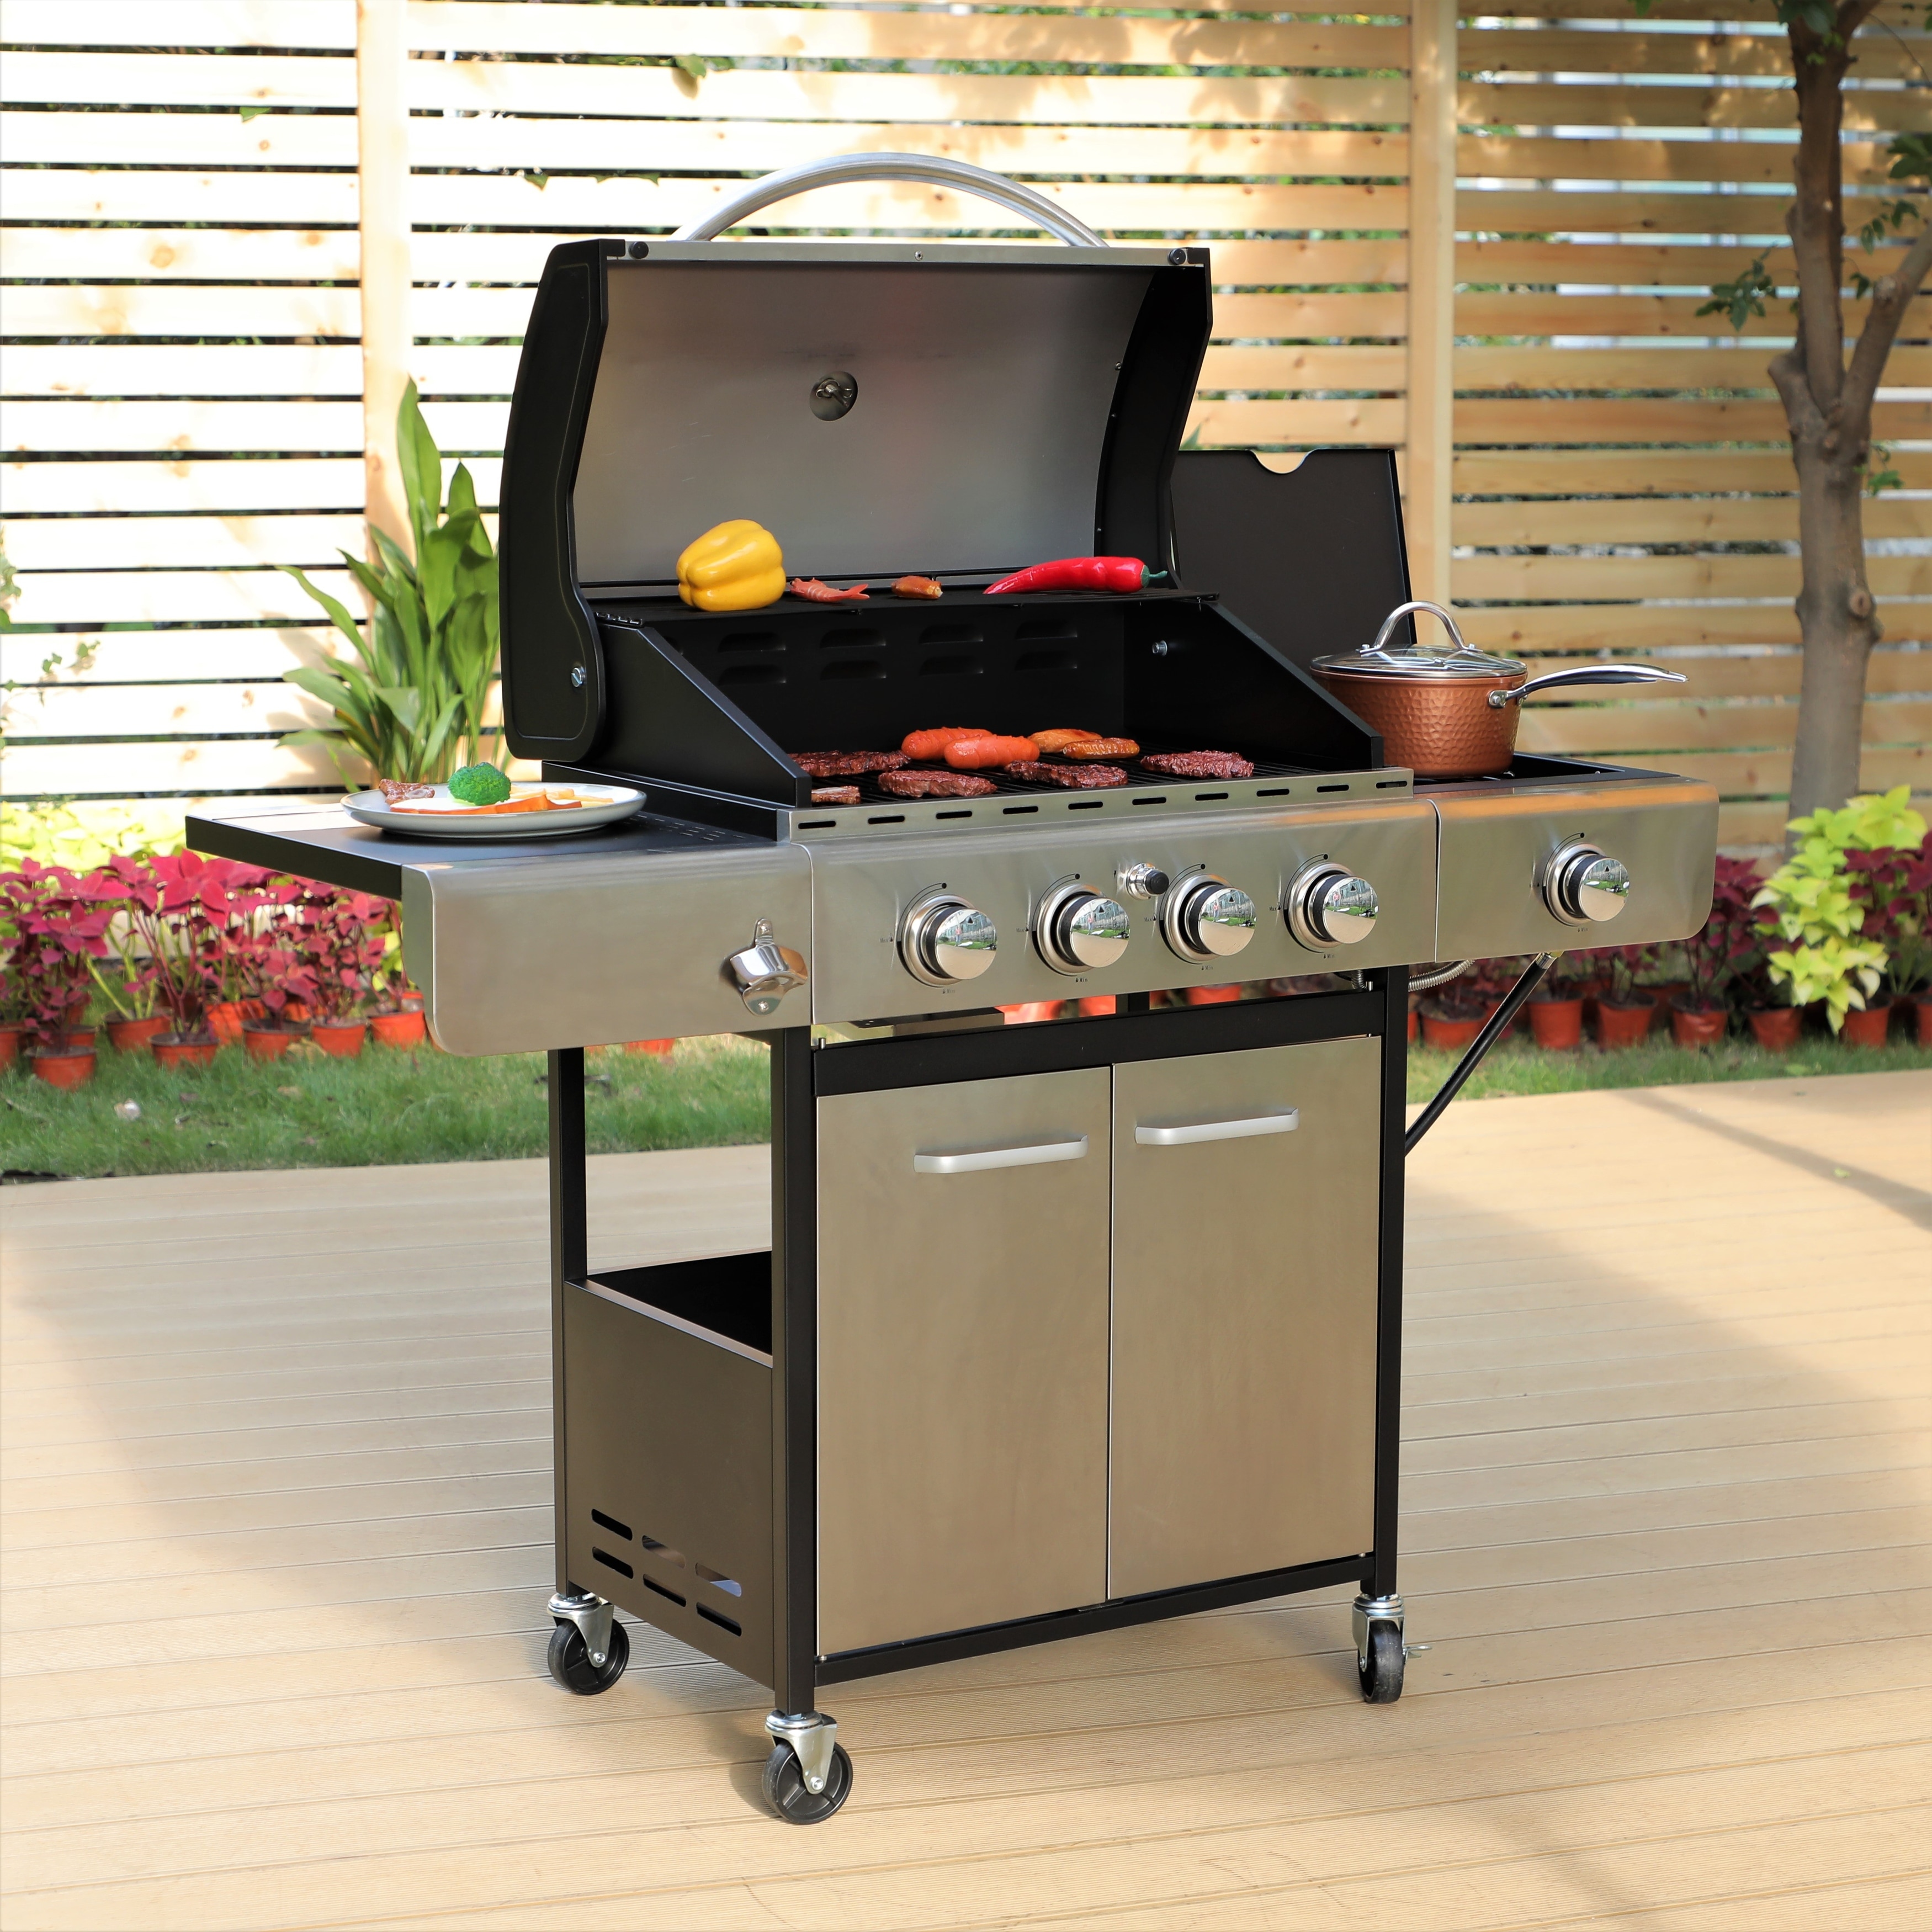 Outsunny 2 Burner Propane Gas Grill Outdoor Portable Tabletop BBQ